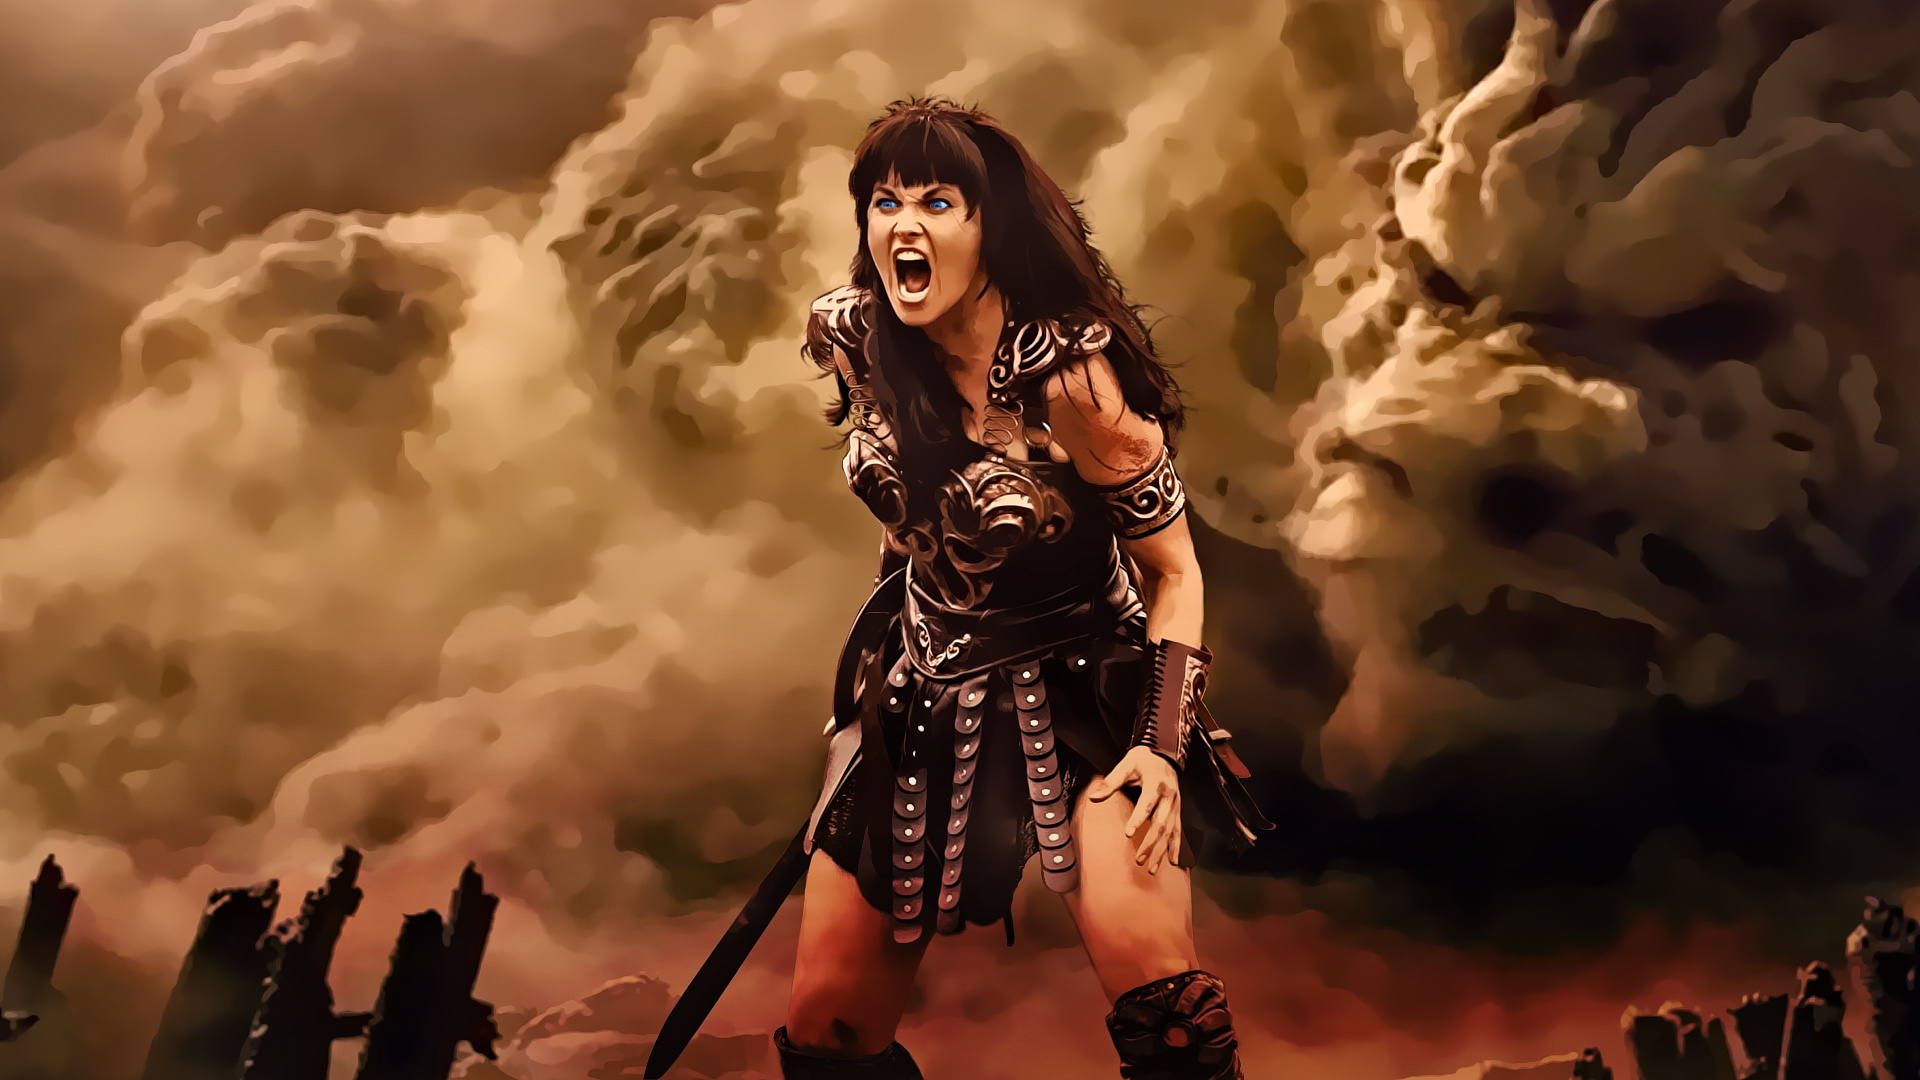 Xena: Warrior Princess (TV Series): The leading character of the show and subsequent comic book of the same name. 1920x1080 Full HD Background.